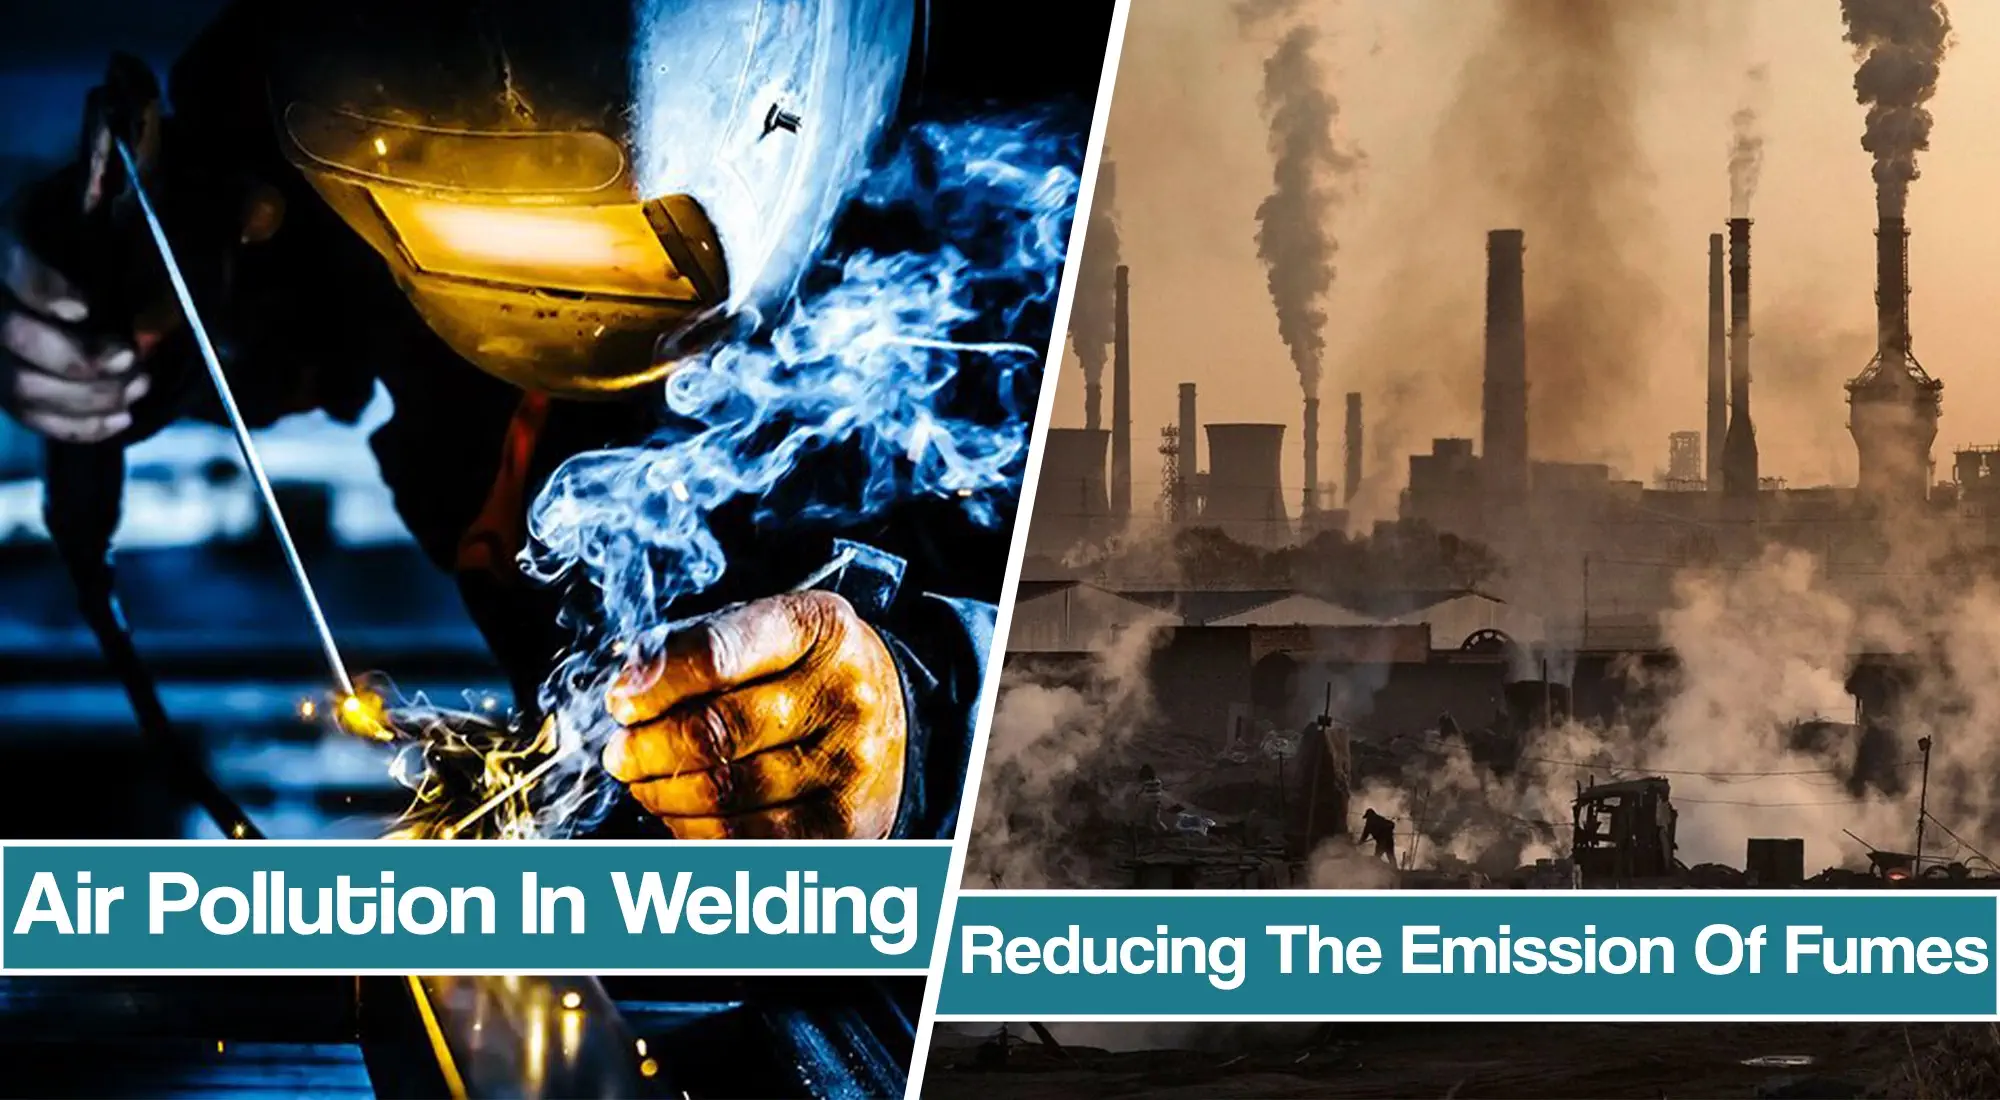 Air Pollution In Welding – Standards and Regulations That Limit Welding Fume Emissions